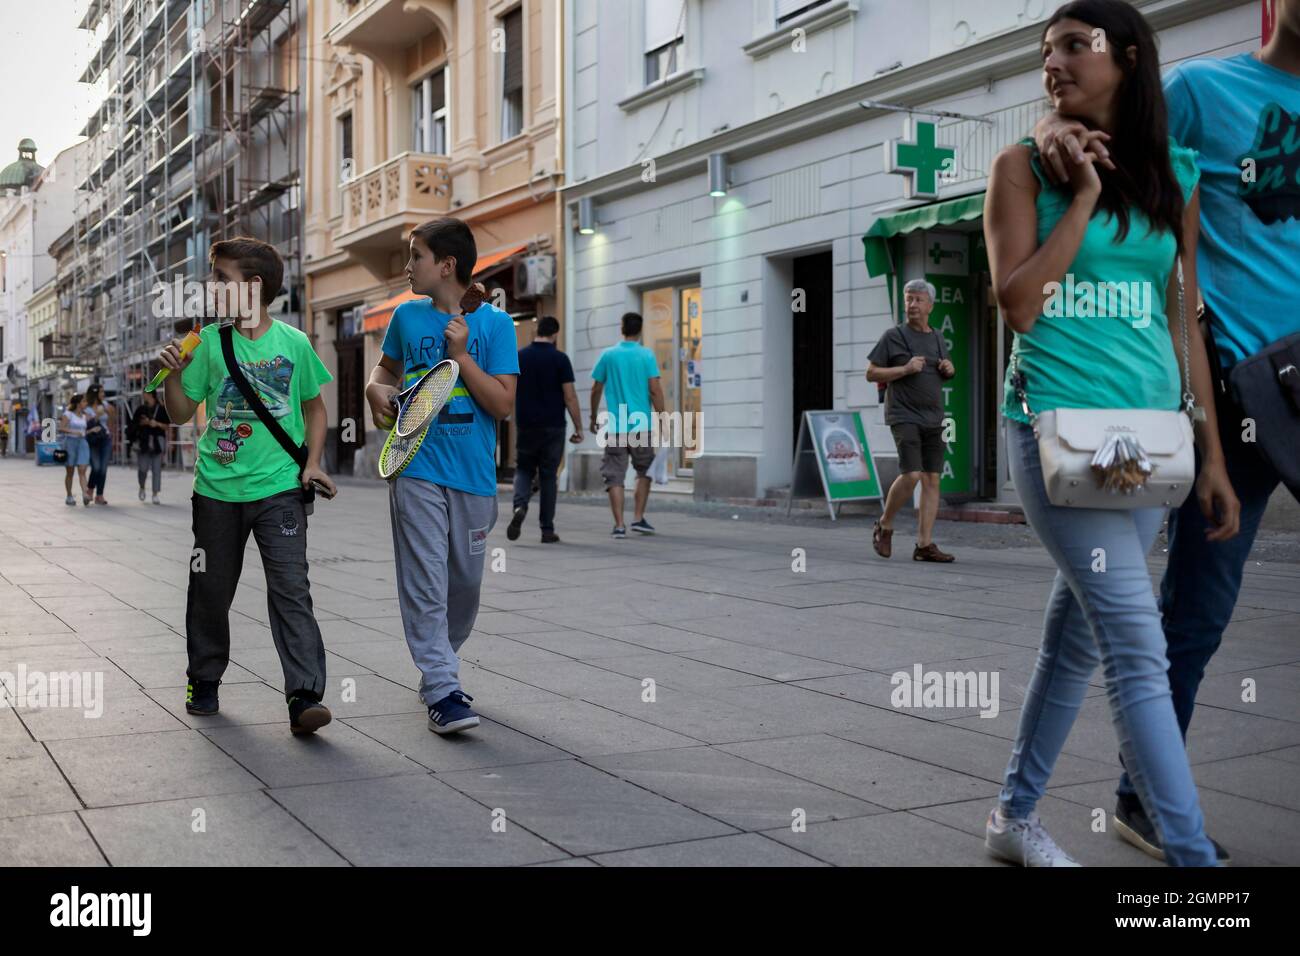 Belgrade, Serbia, Sep 10, 2019: A street scene with people walking forward while being distracted to their right Stock Photo